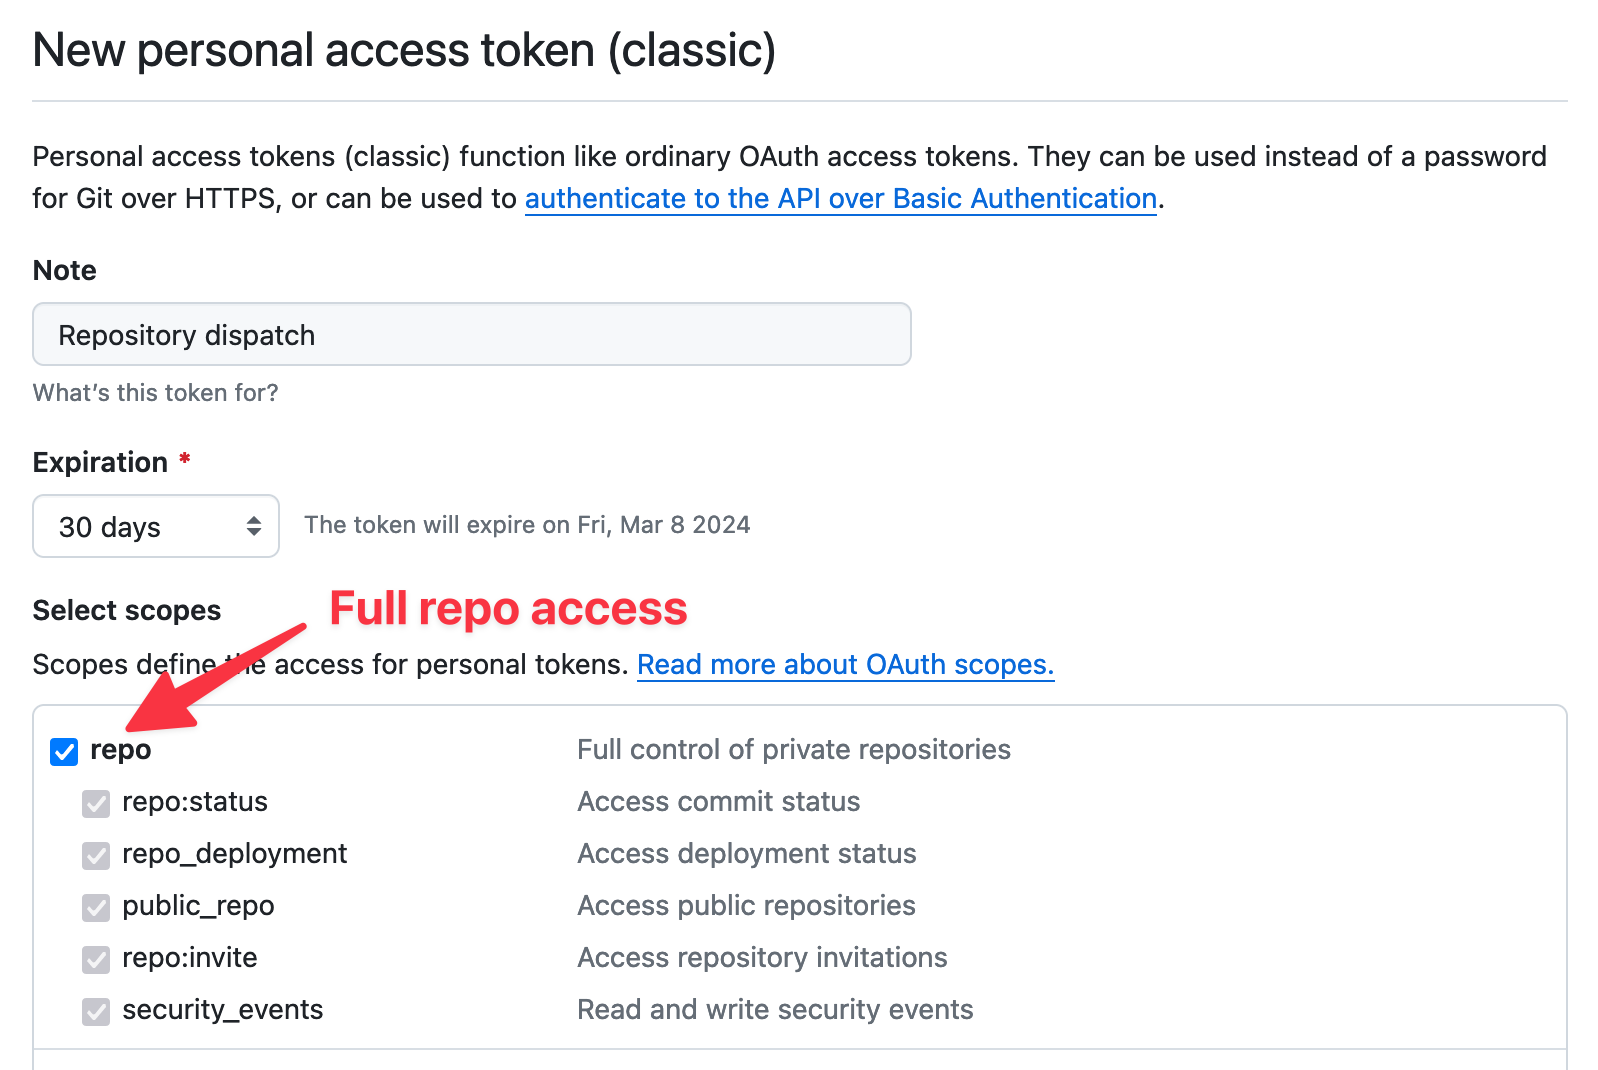 Screenshot of the setup of a personal access token. It shows the settings that need to be enabled (all repo related checkboxes should be ticked).